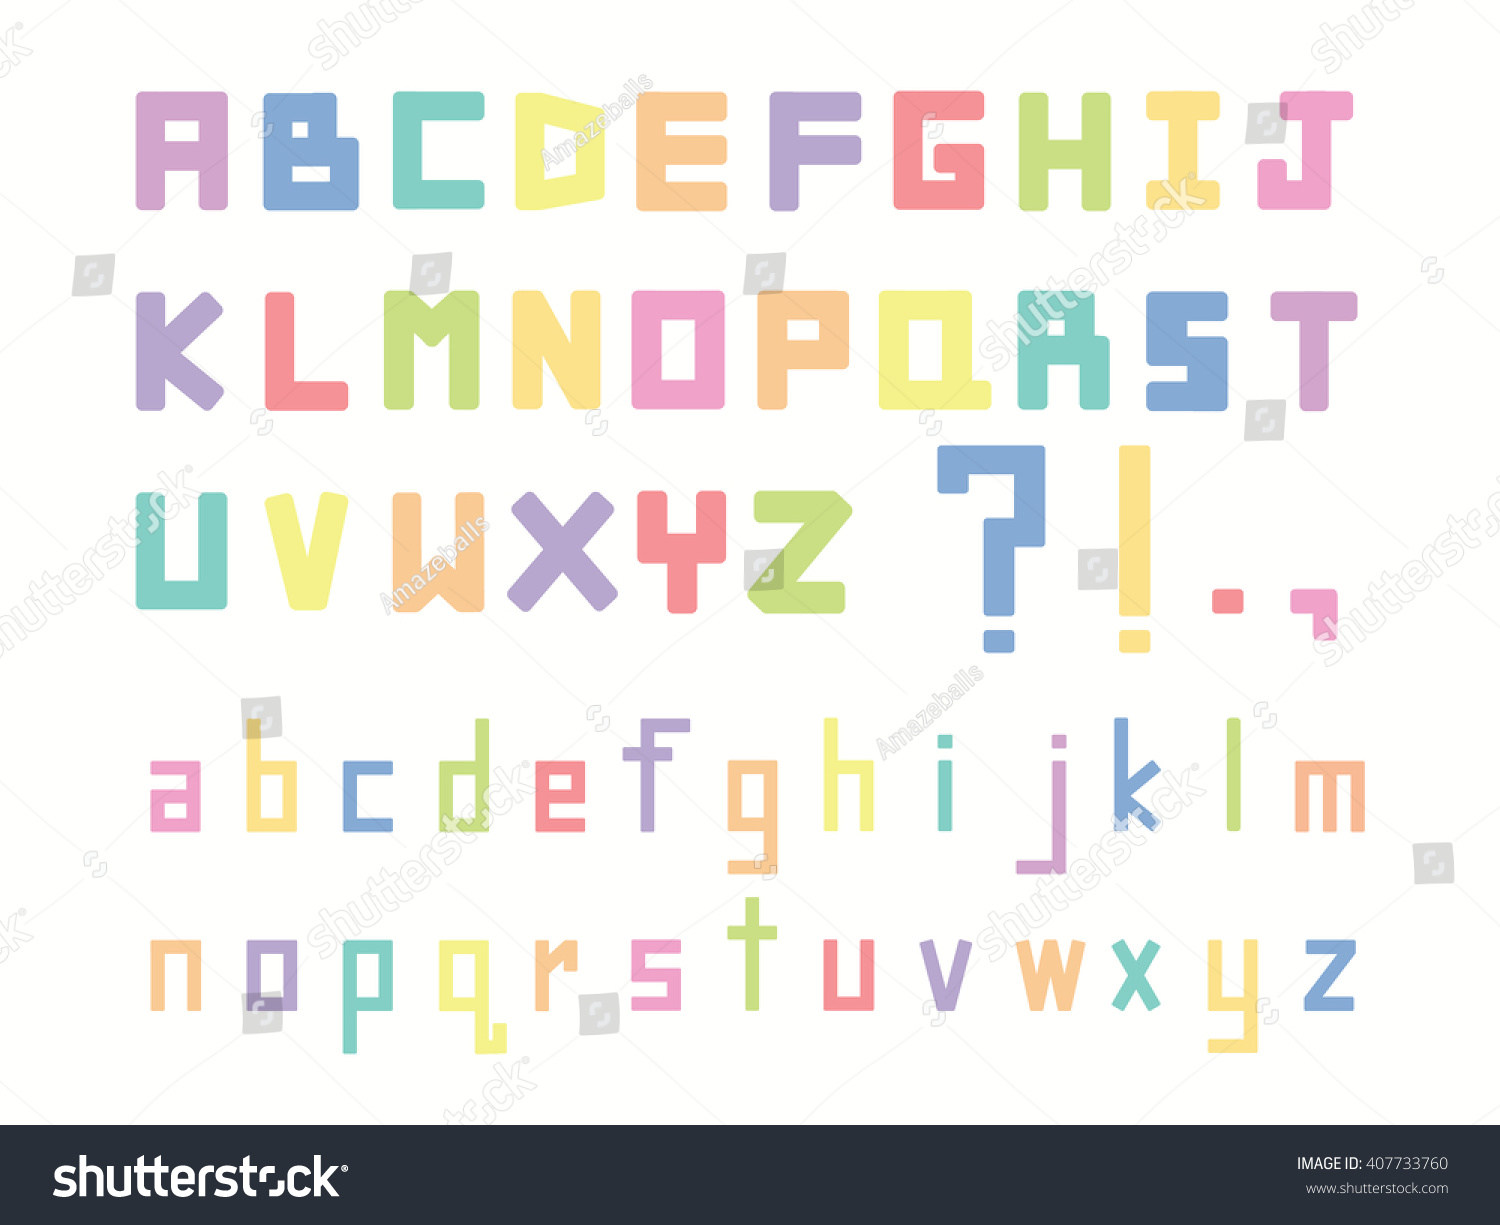 Pastel Letters Alphabet Illustration Vector Stock Vector (Royalty Free ...